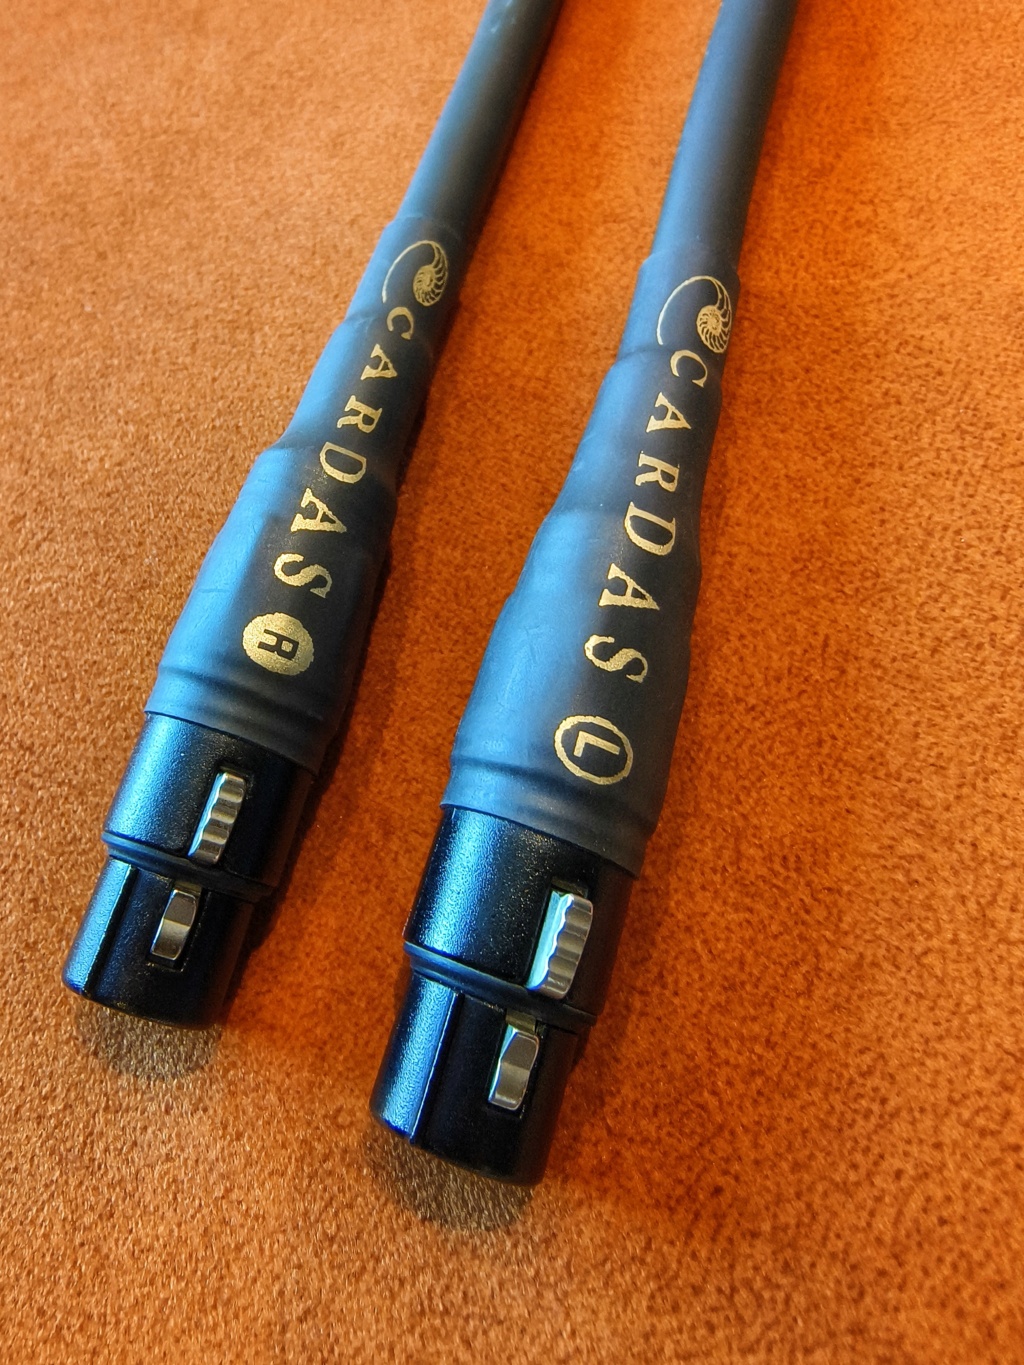 Cardas Golden Reference 1.5m XLR interconnect (Sold) Img_2014